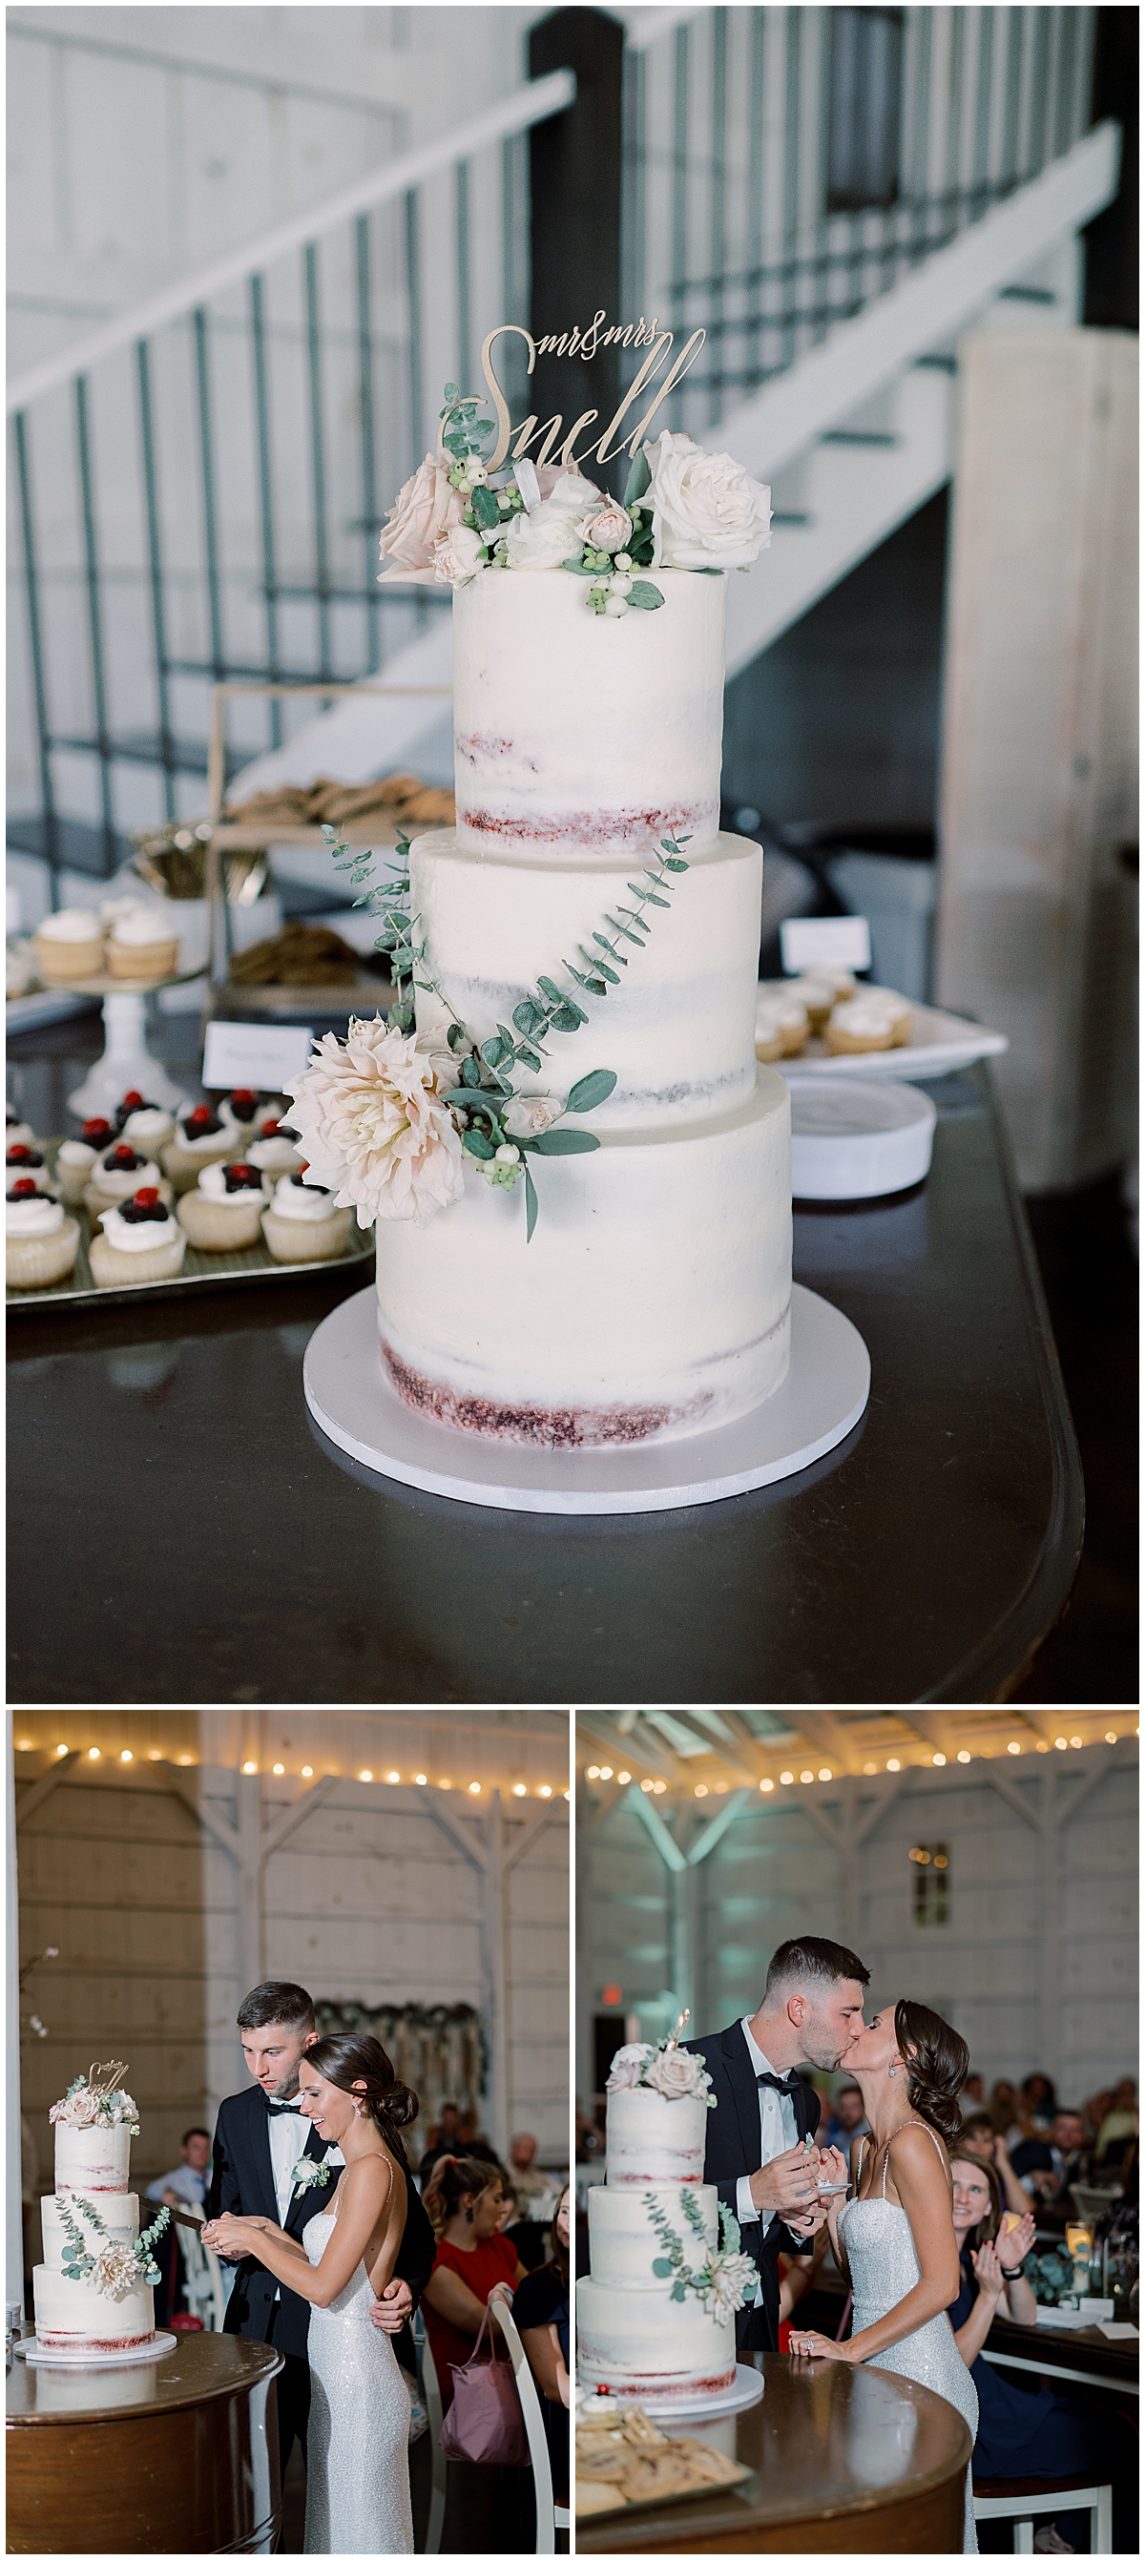 wedding cake with topper and cake cutting by couple by Addie Eshelman photography 